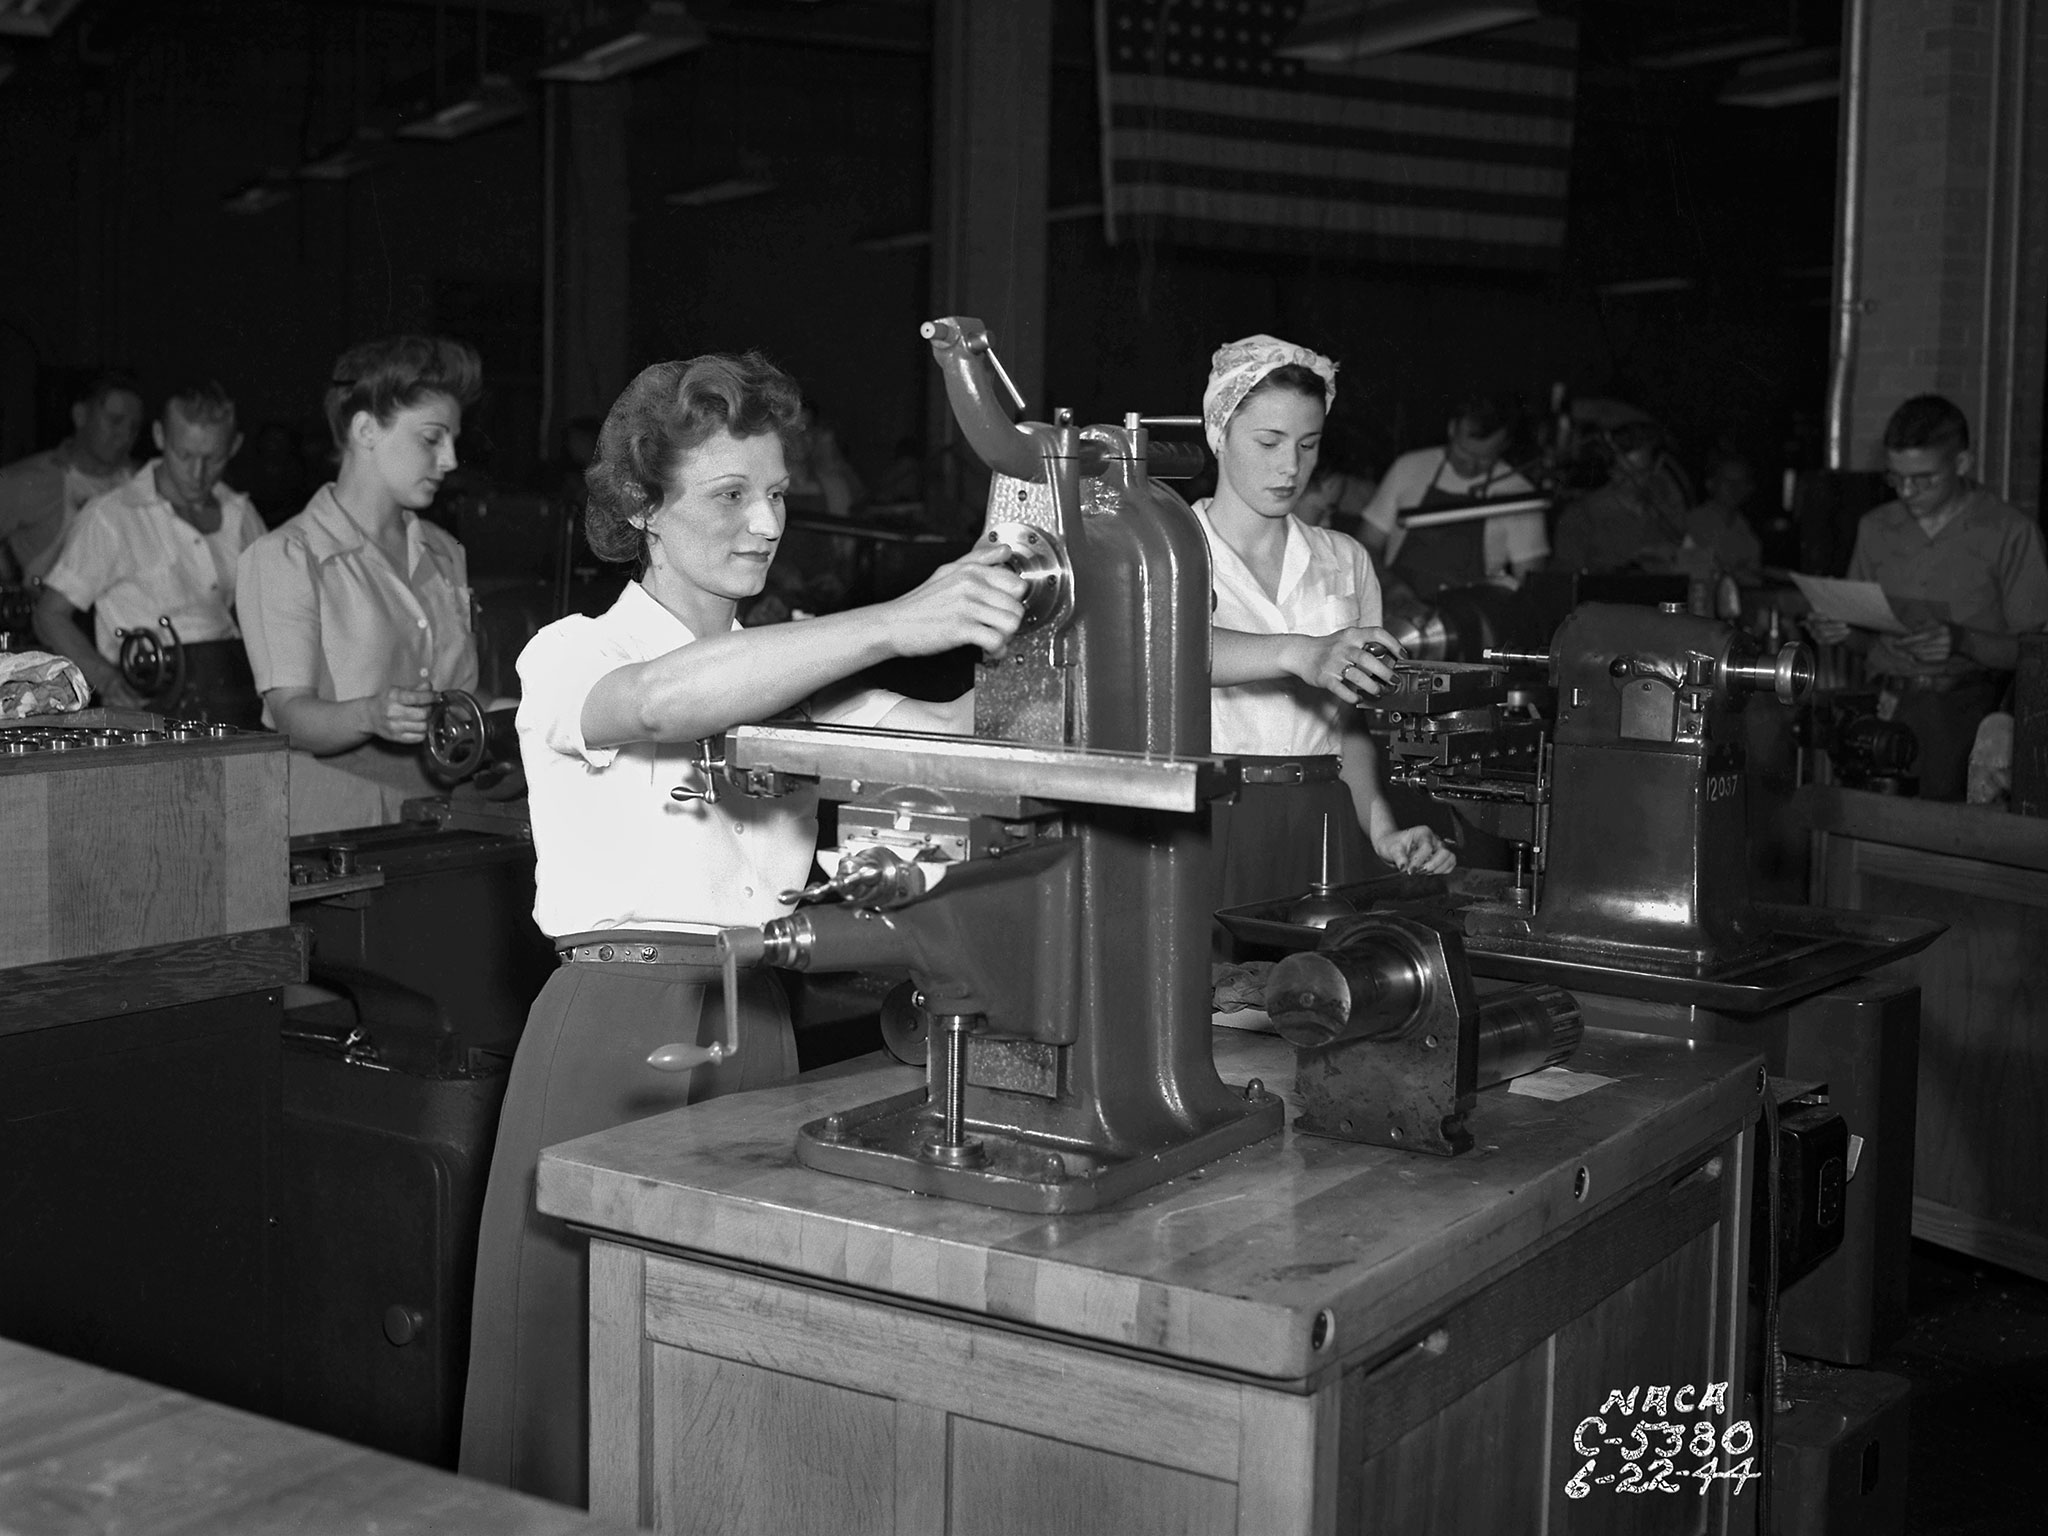 Women working in a machine shop at Lewis Research Center in the 1940s.